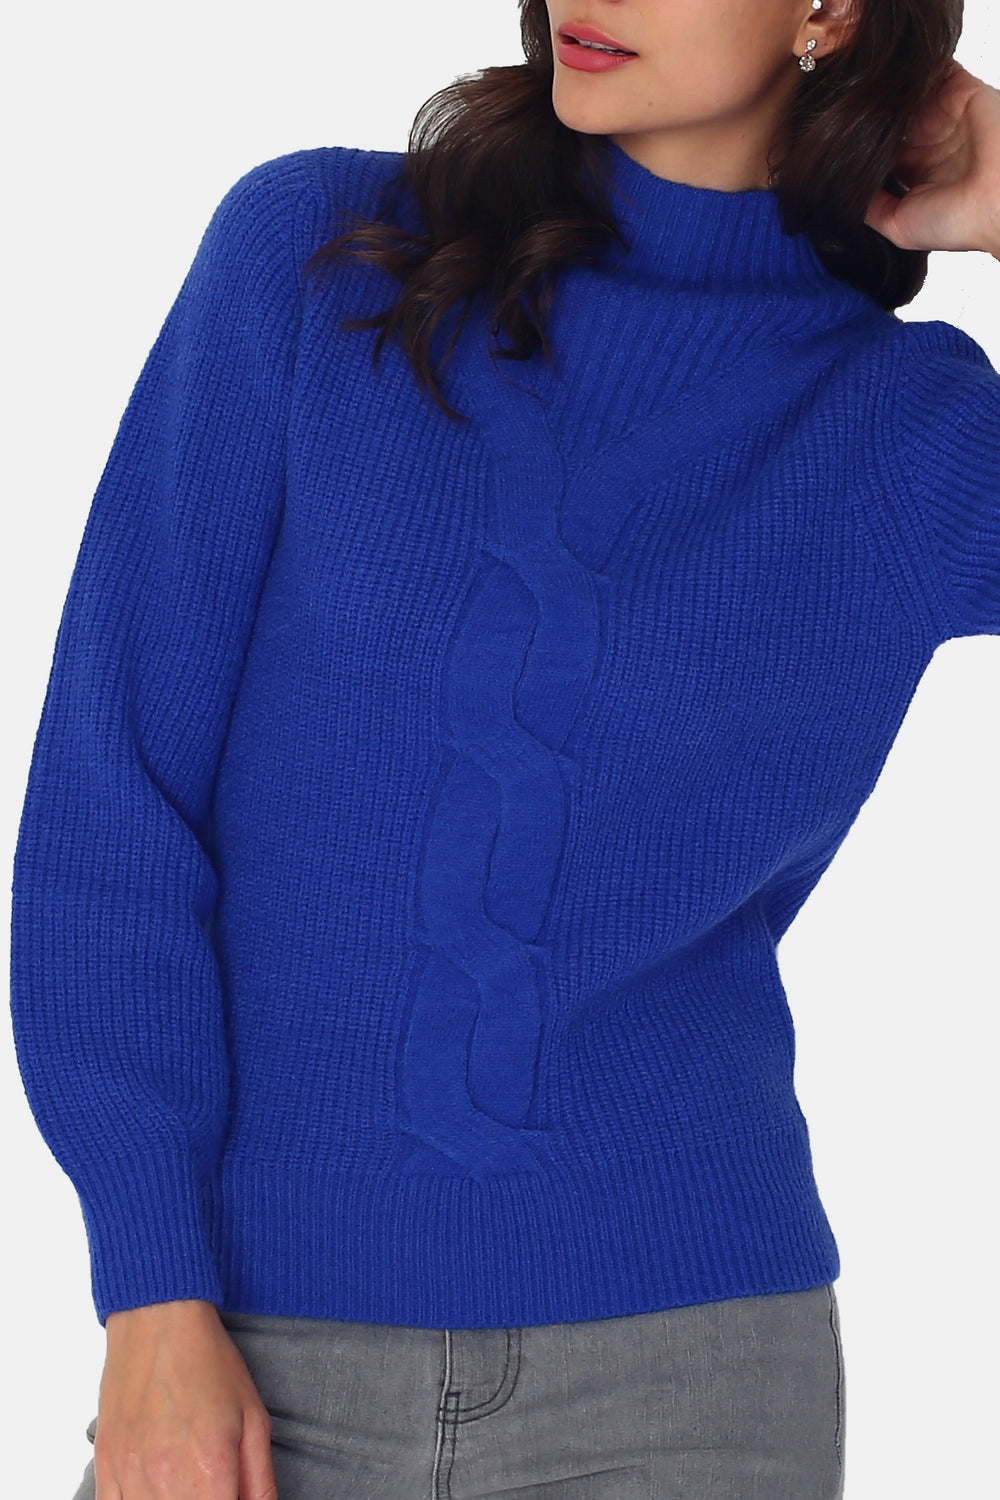 High neck sweater with long sleeves slightly puffy cables in front